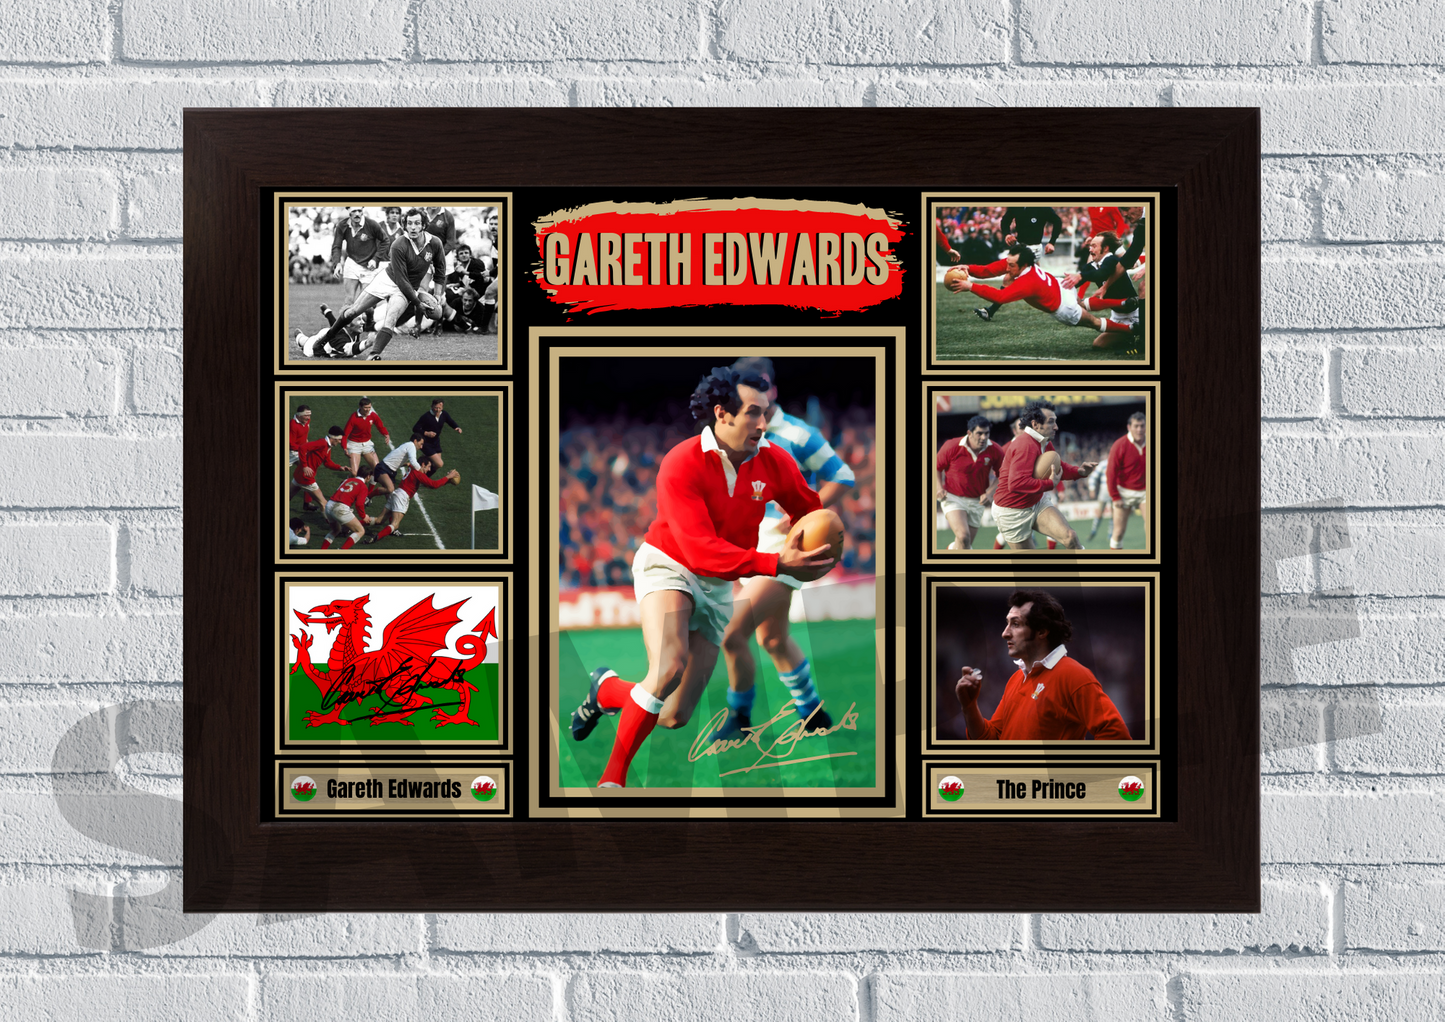 Gareth Edwards (Rugby) Memorabilia/collectable #90 - Signed print